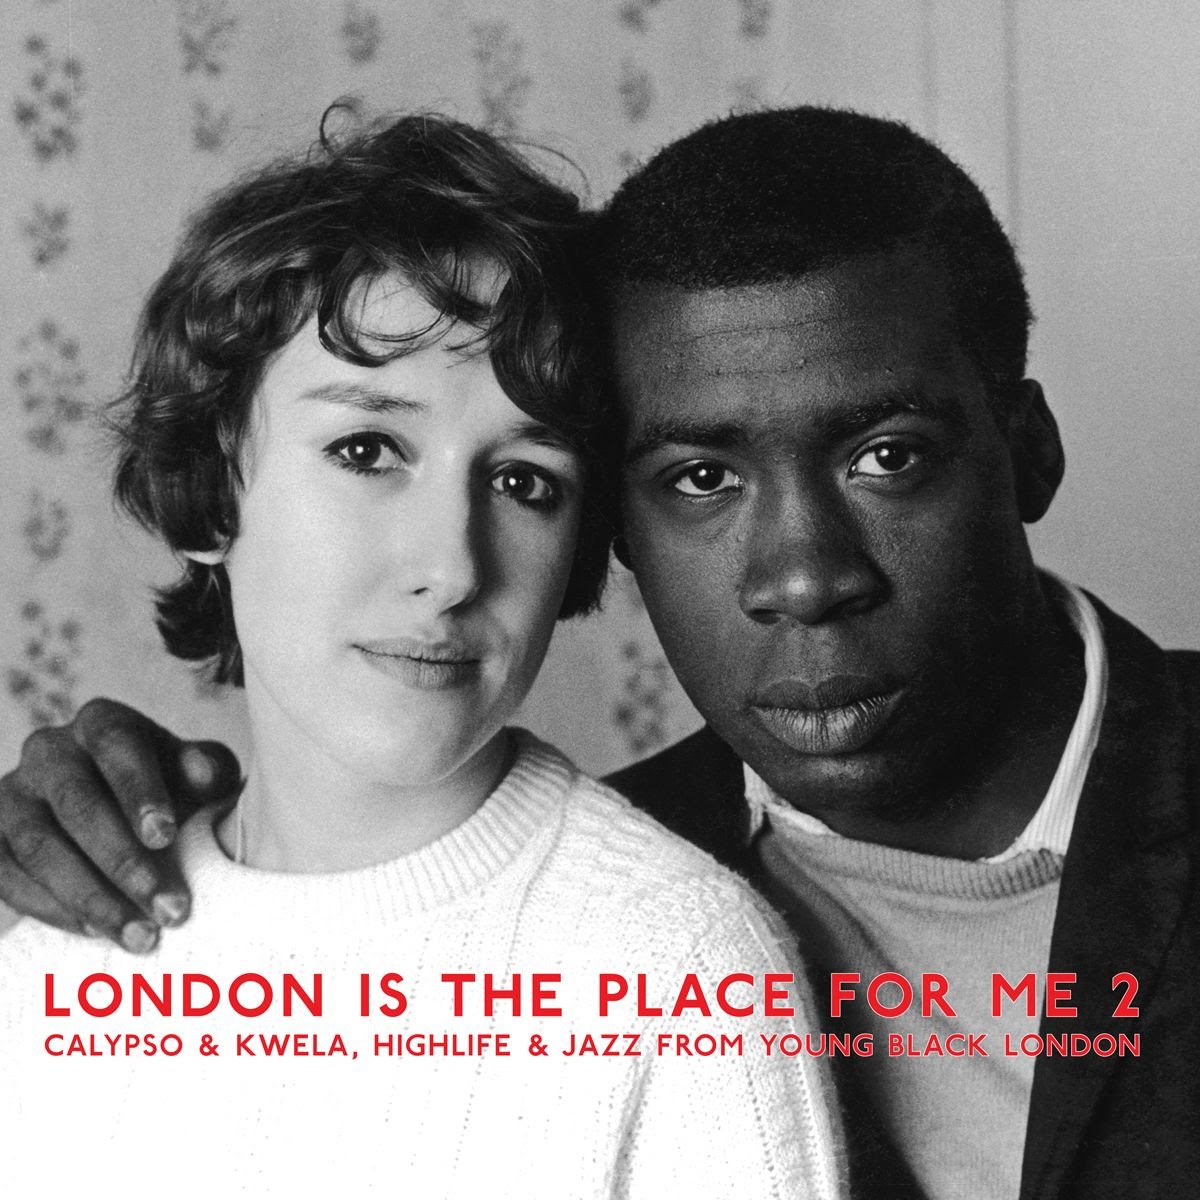 Album cover featuring a black man and a white woman close together, with solemn expressions. Text reads "London is the place for me 2: Calypsos & Kwela, Highlife & Jazz" by Tandem Coffee Roasters.